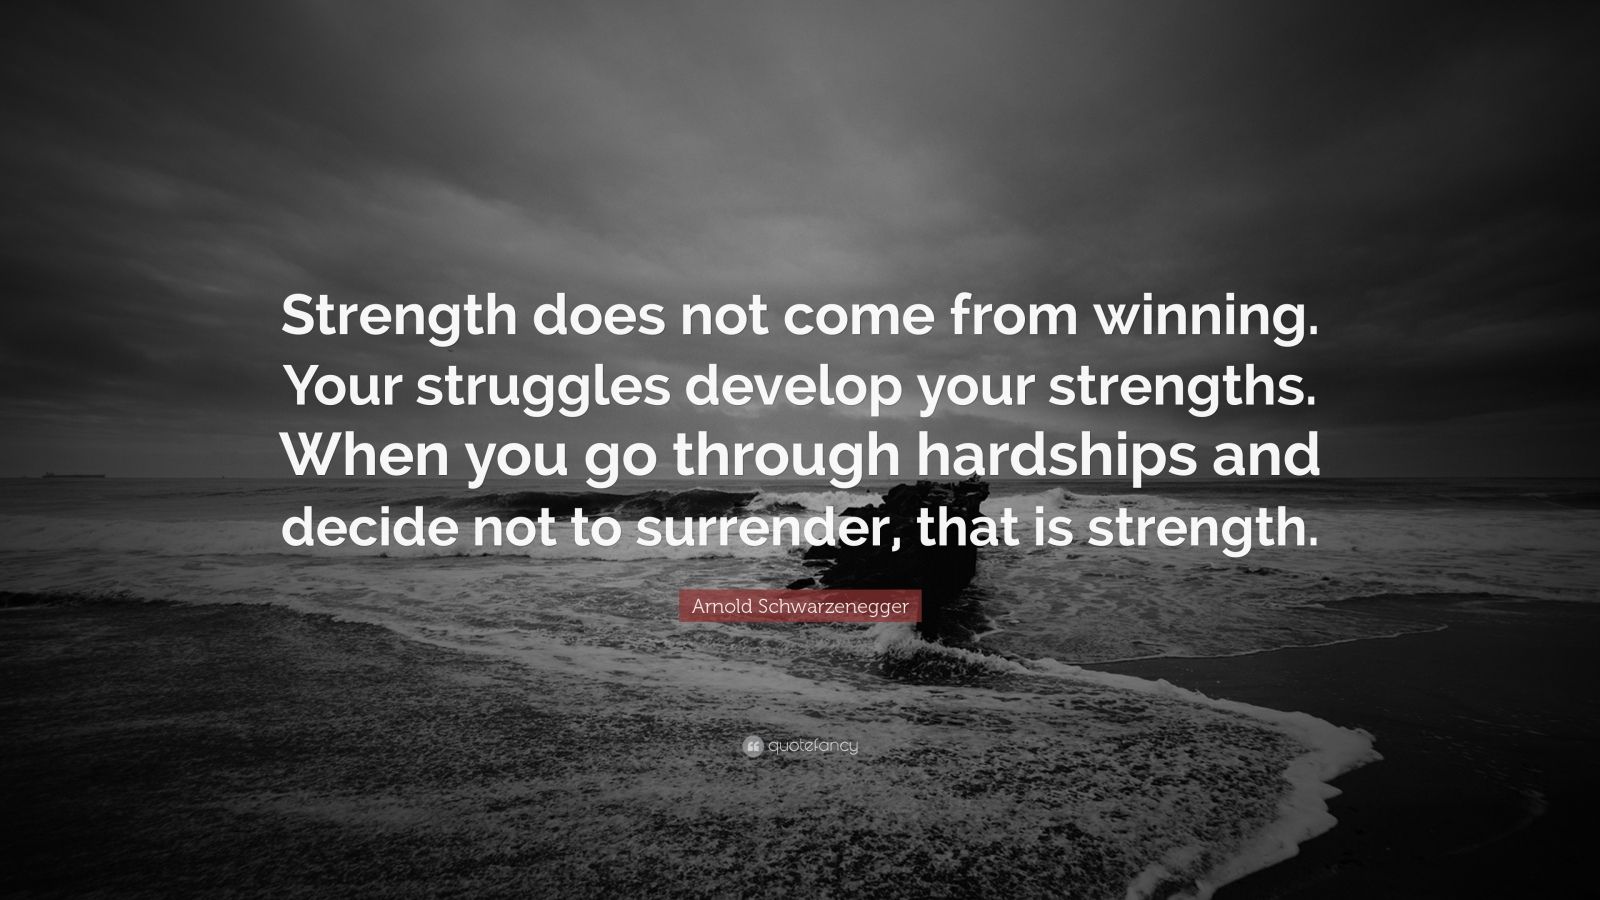 Arnold Schwarzenegger Quote: “Strength does not come from winning. Your ...